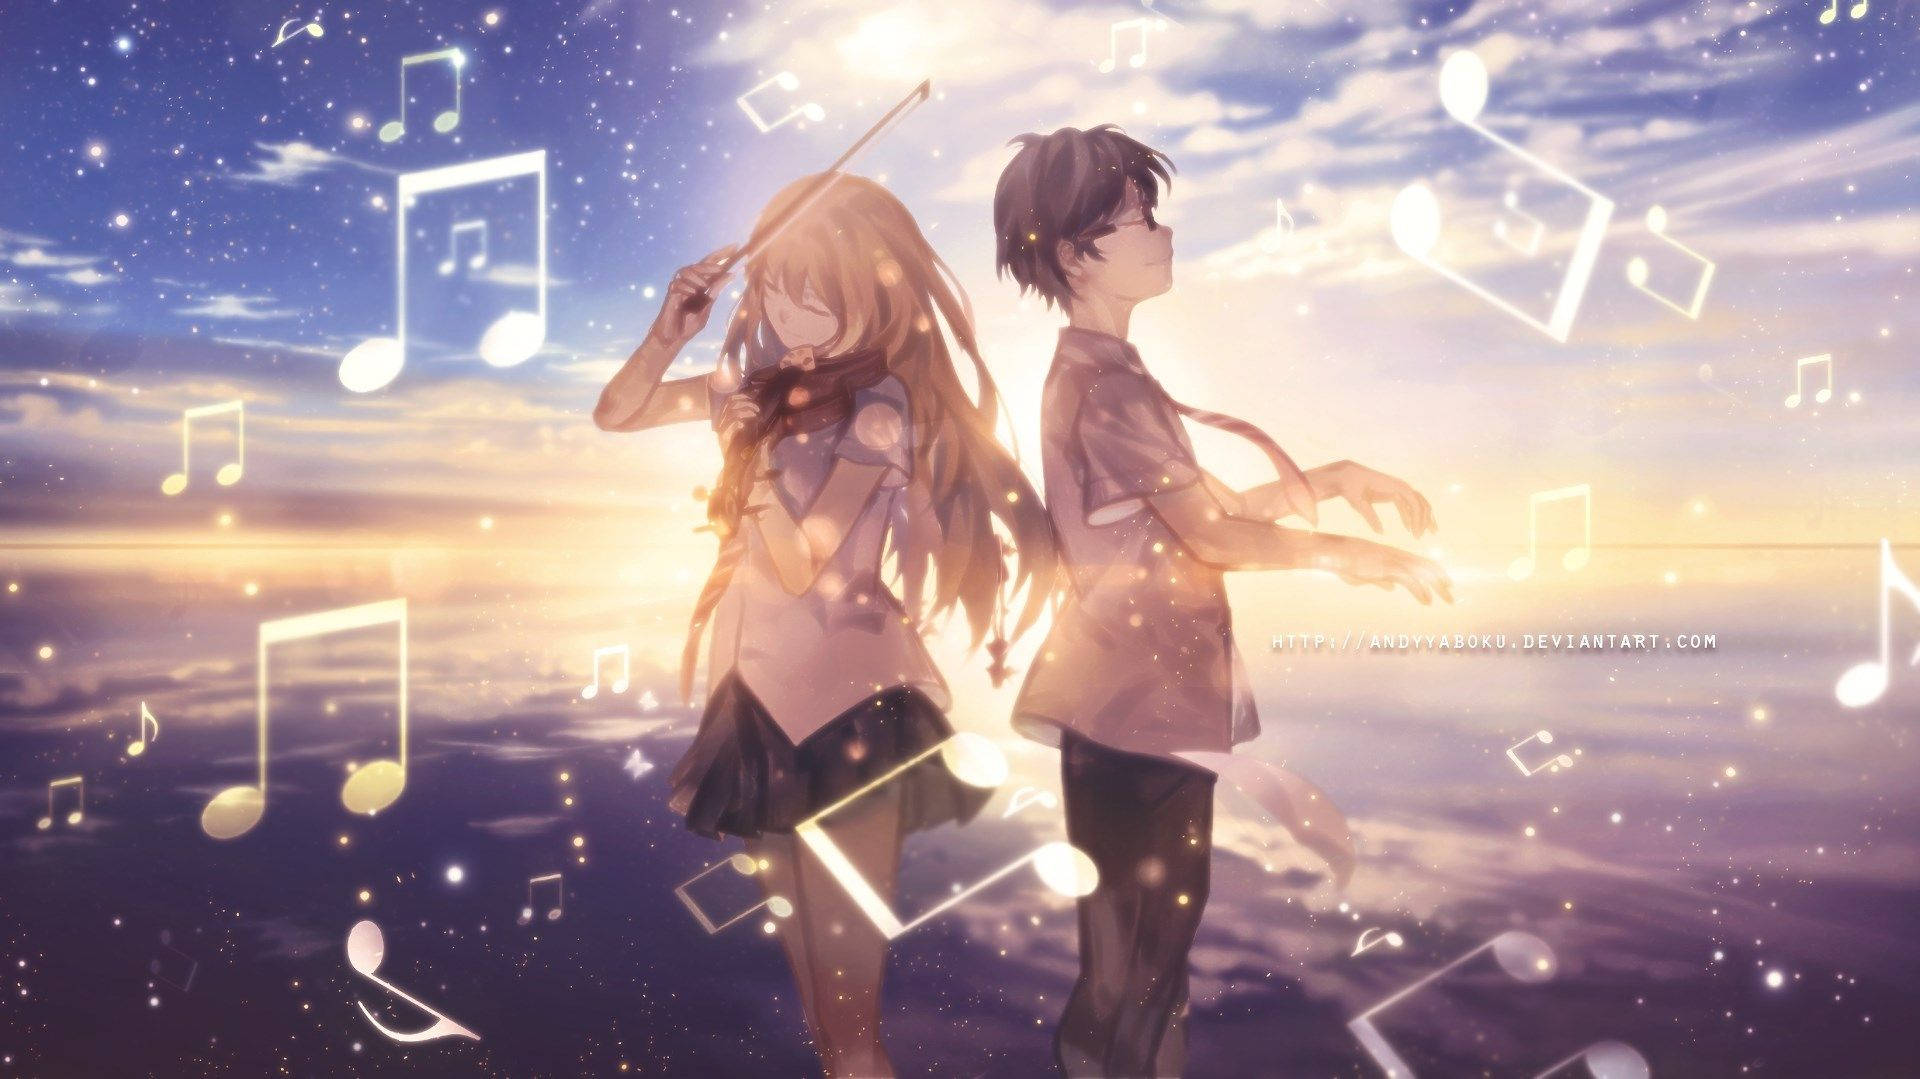 Light in the darkness – Music of friendship in Your Lie In April Wallpaper